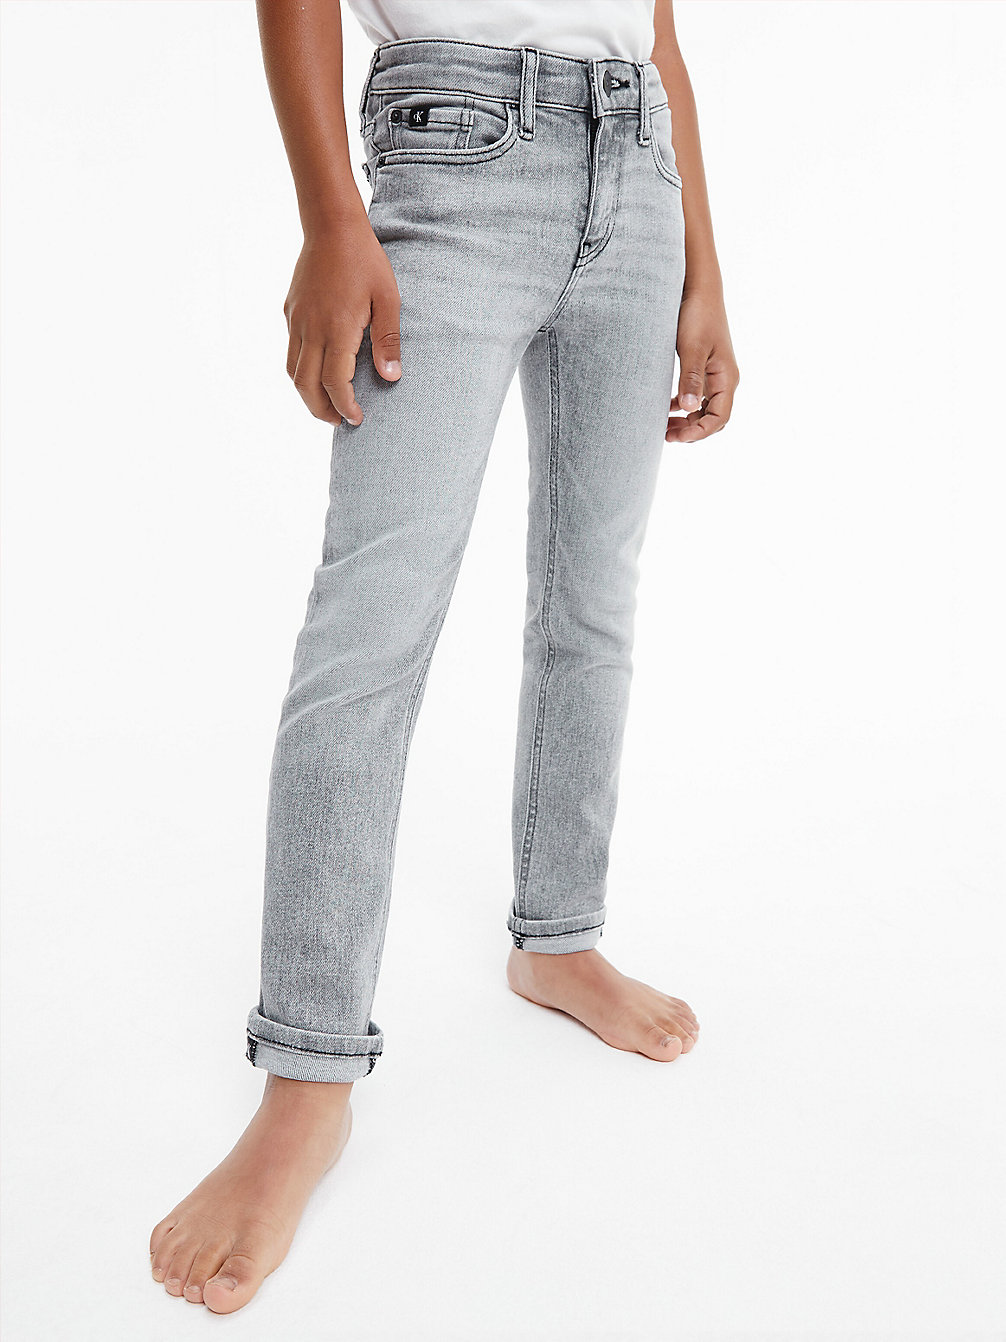 LIGHT WASH GREY > Jeansy Mid Rise Slim > undefined boys - Calvin Klein